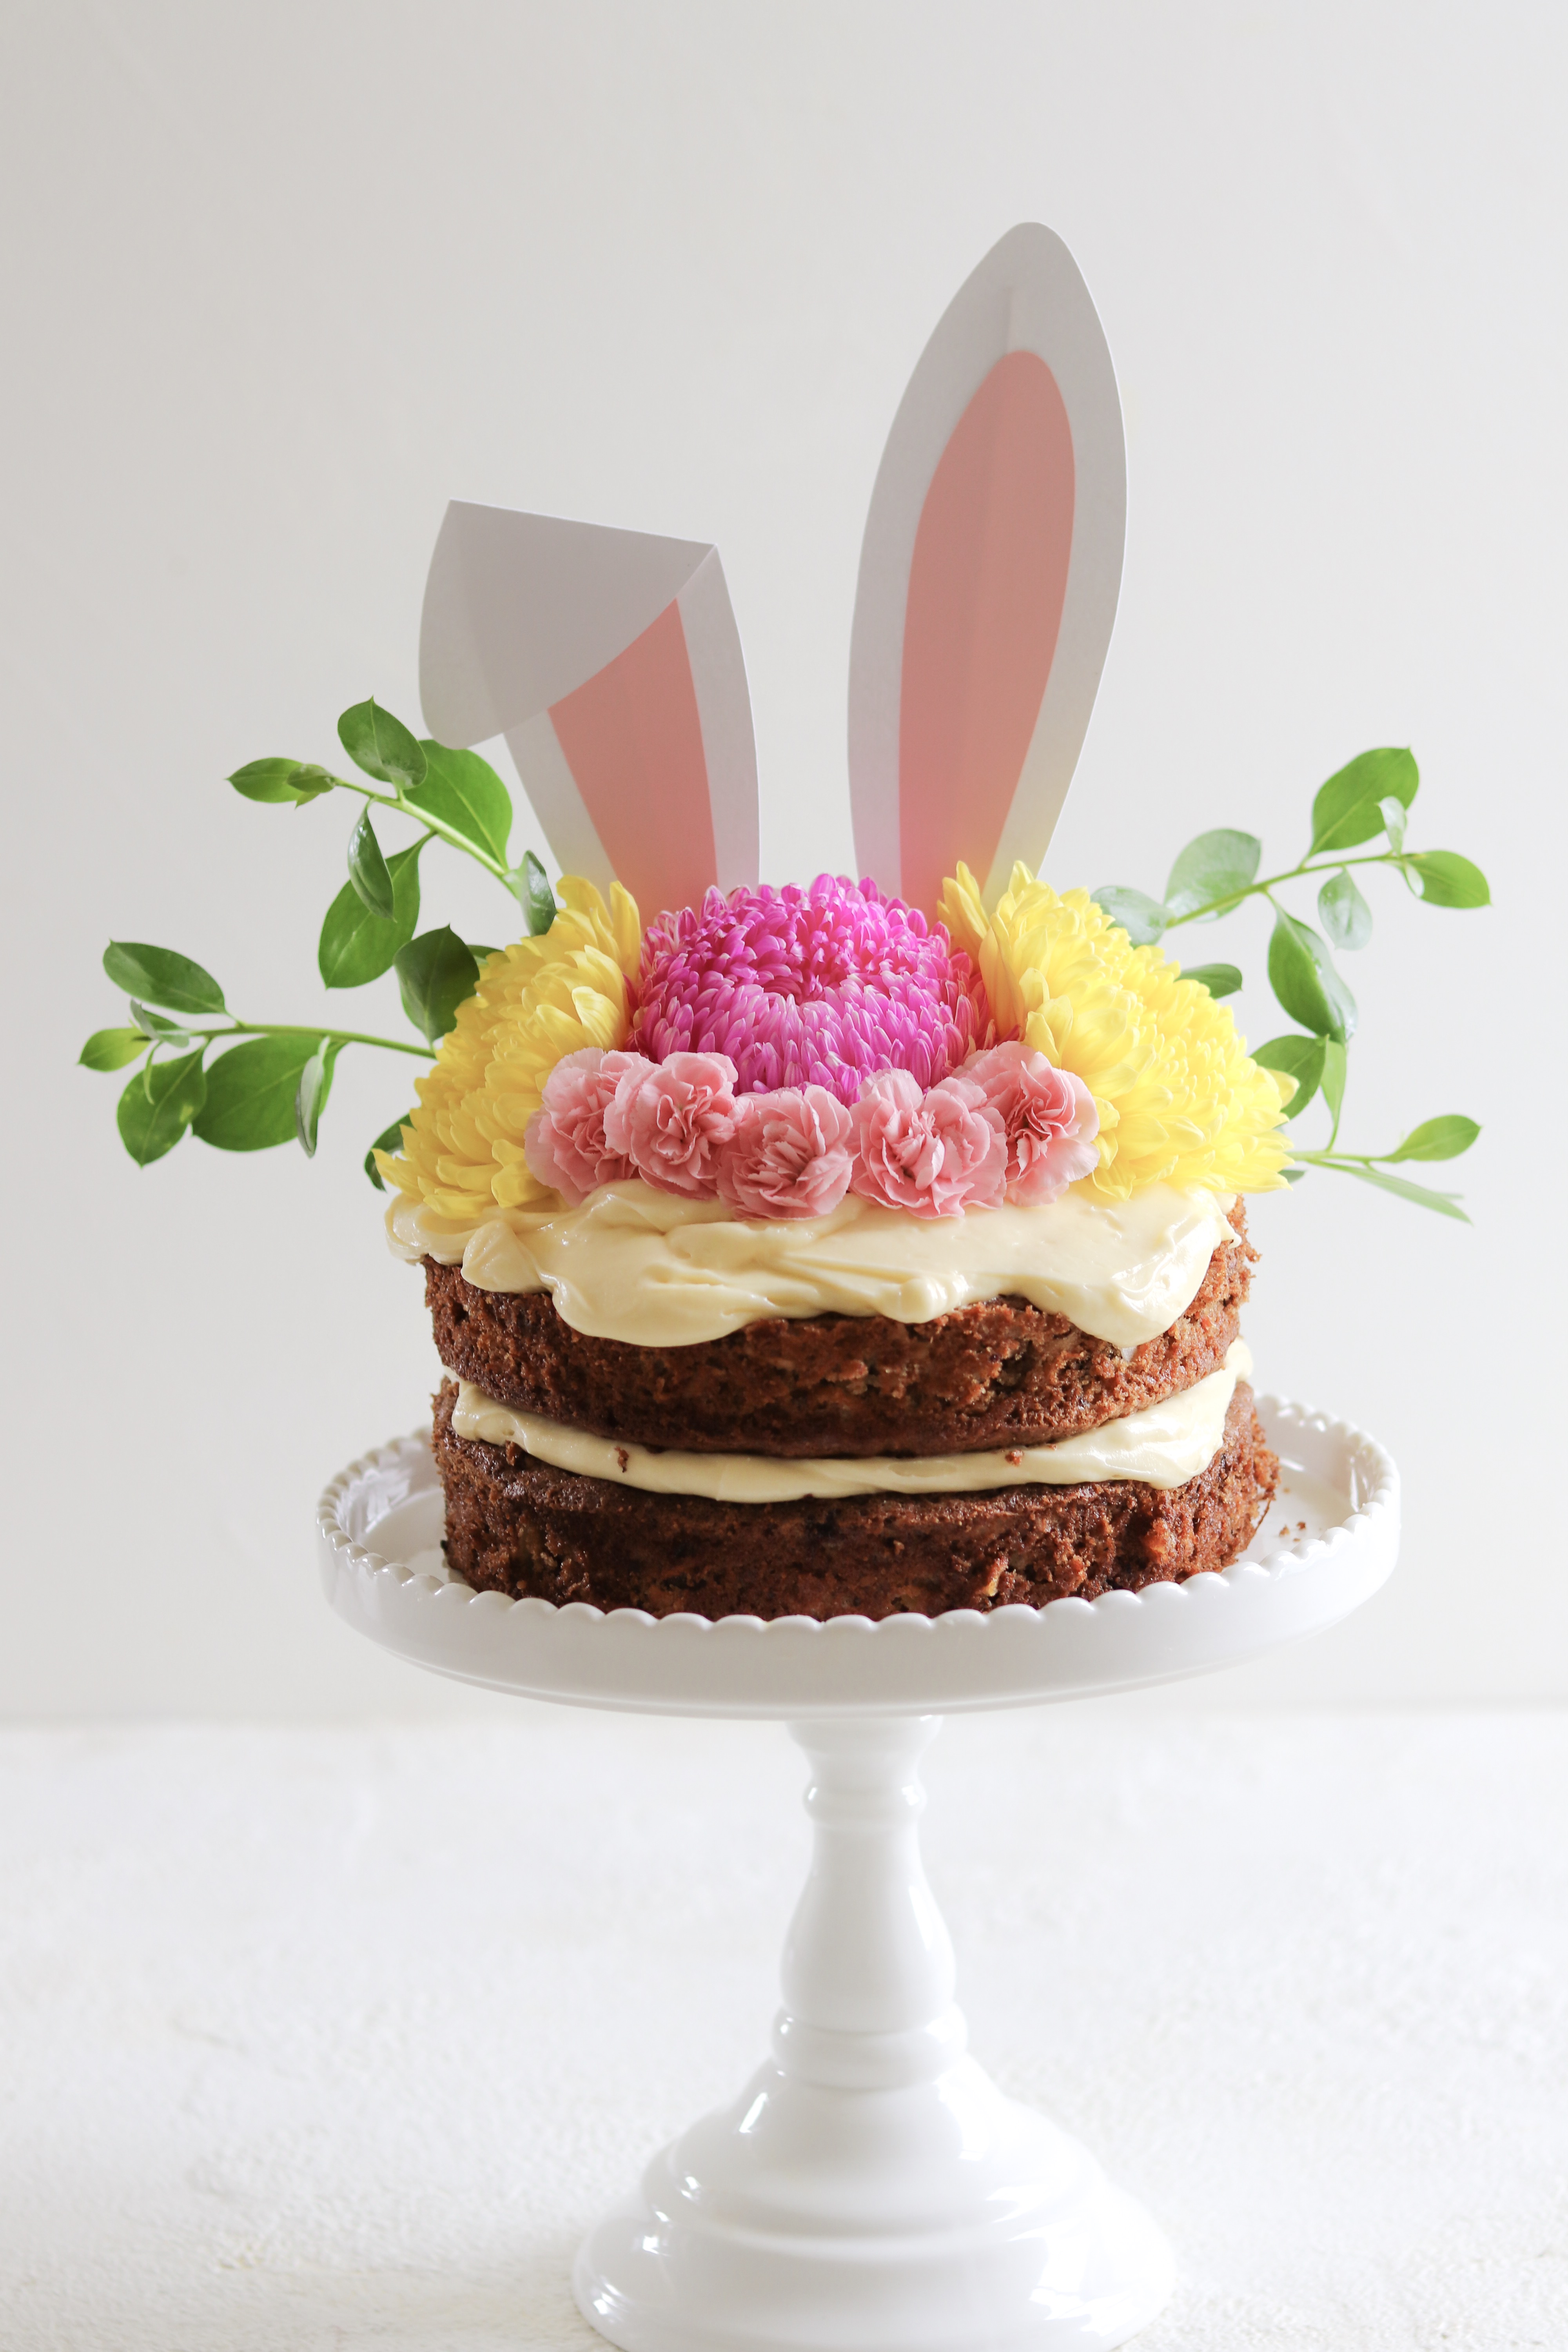 A delicious carrot cake with lashings of cream cheese frosting, decorated for Easter with flowers and bunny ears